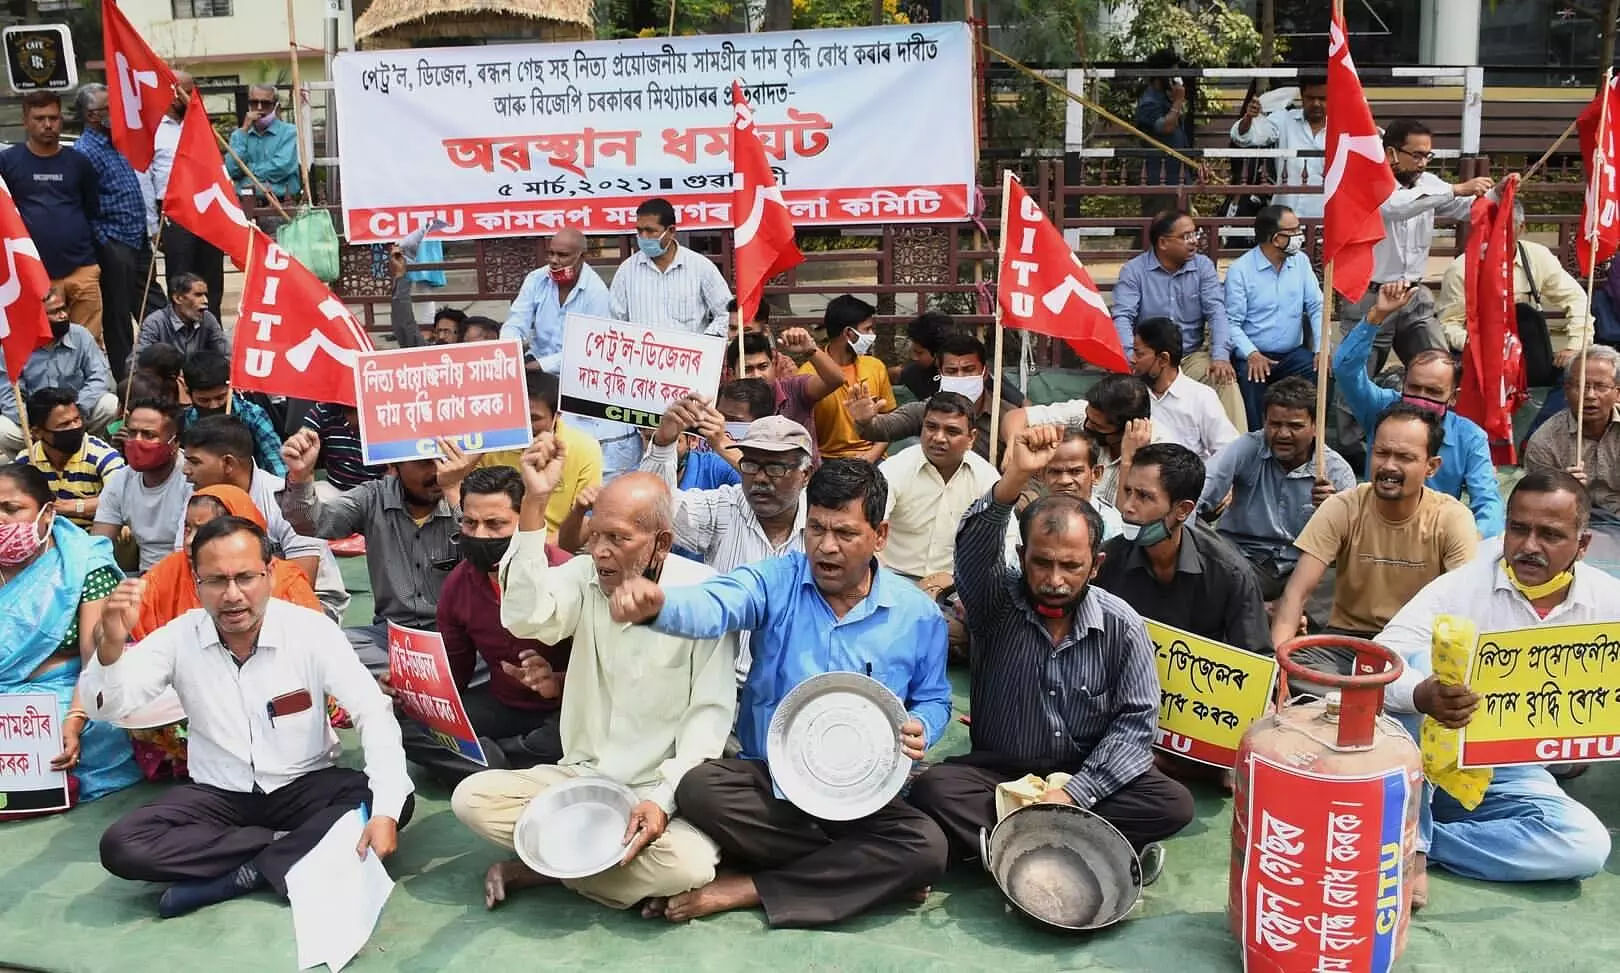 CITU staged protest against hike in prices of items